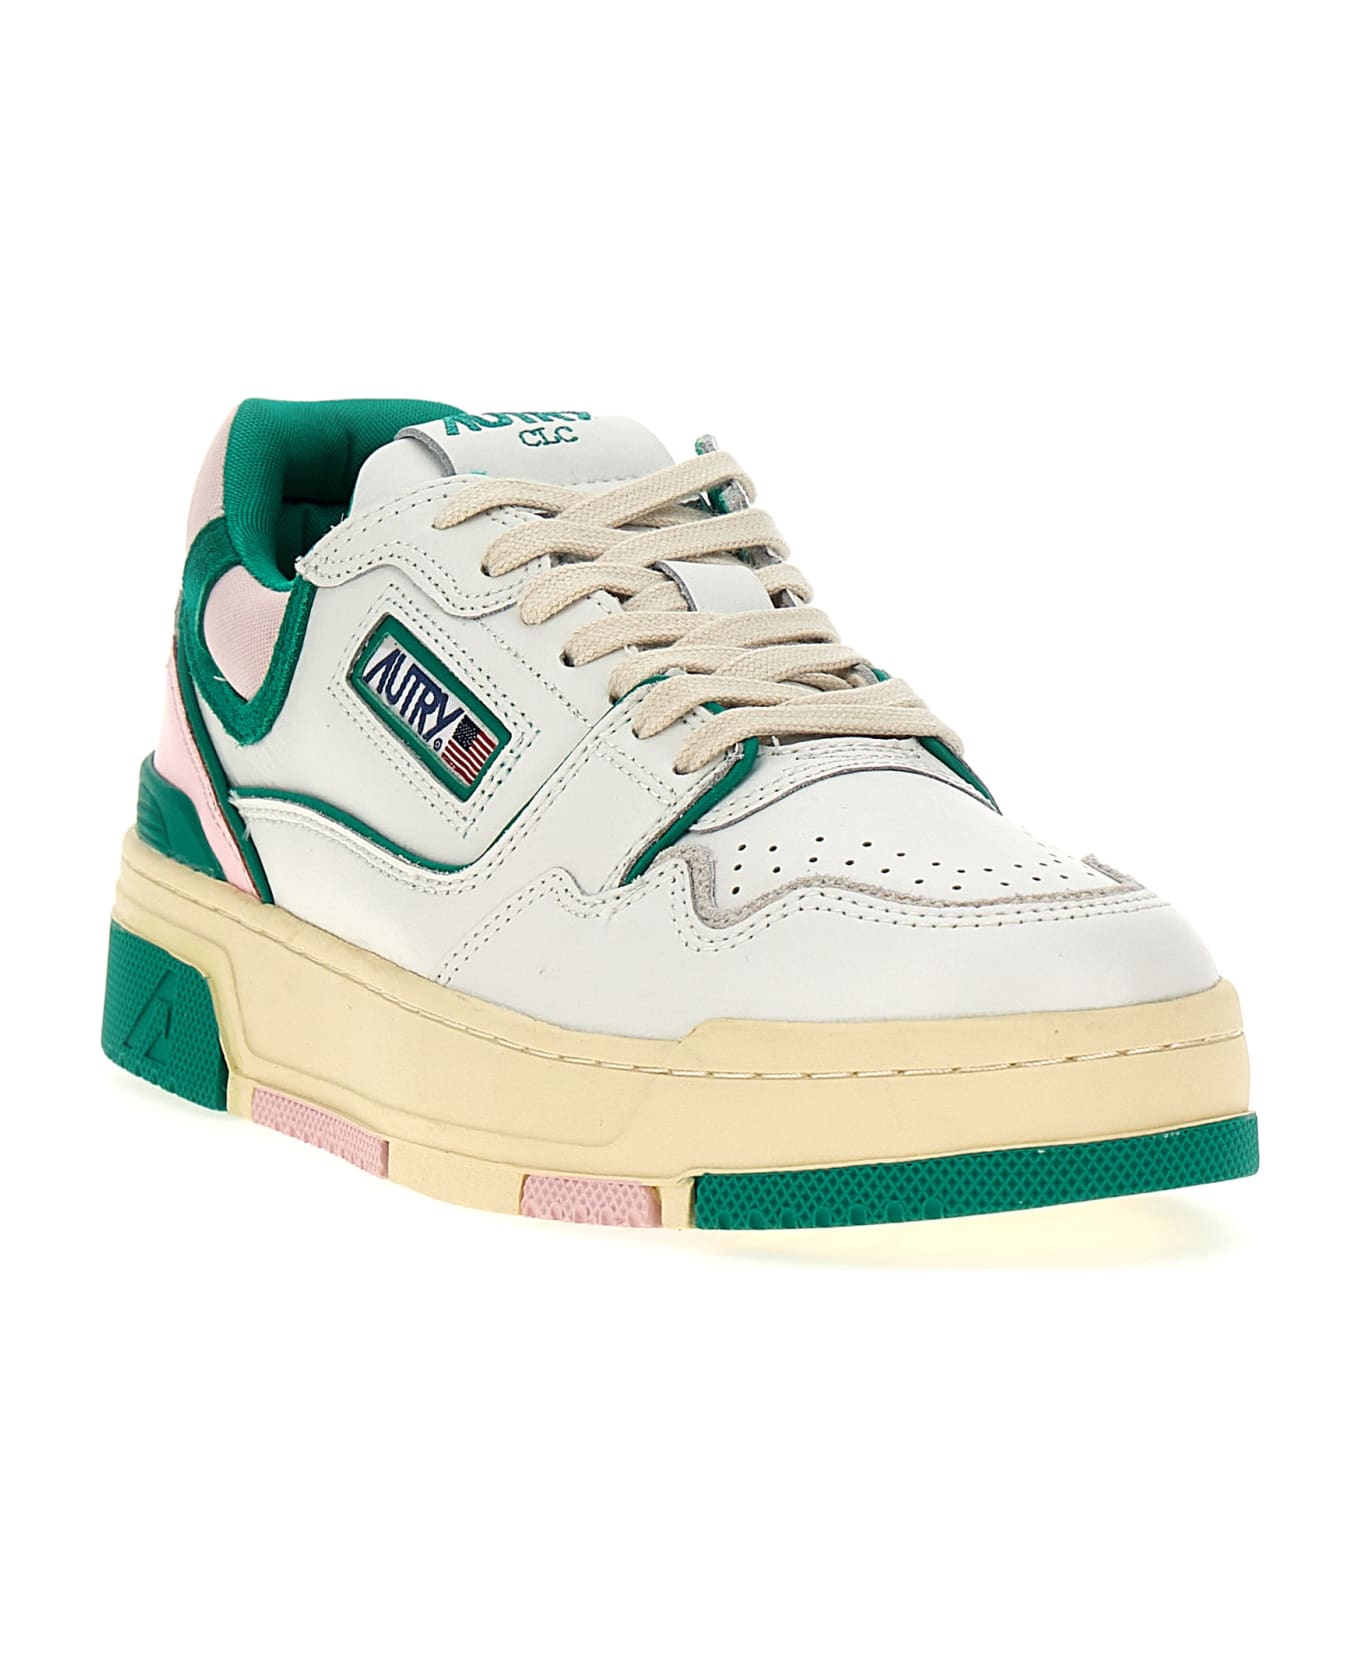 Autry Clc Leather Sneakers - Green